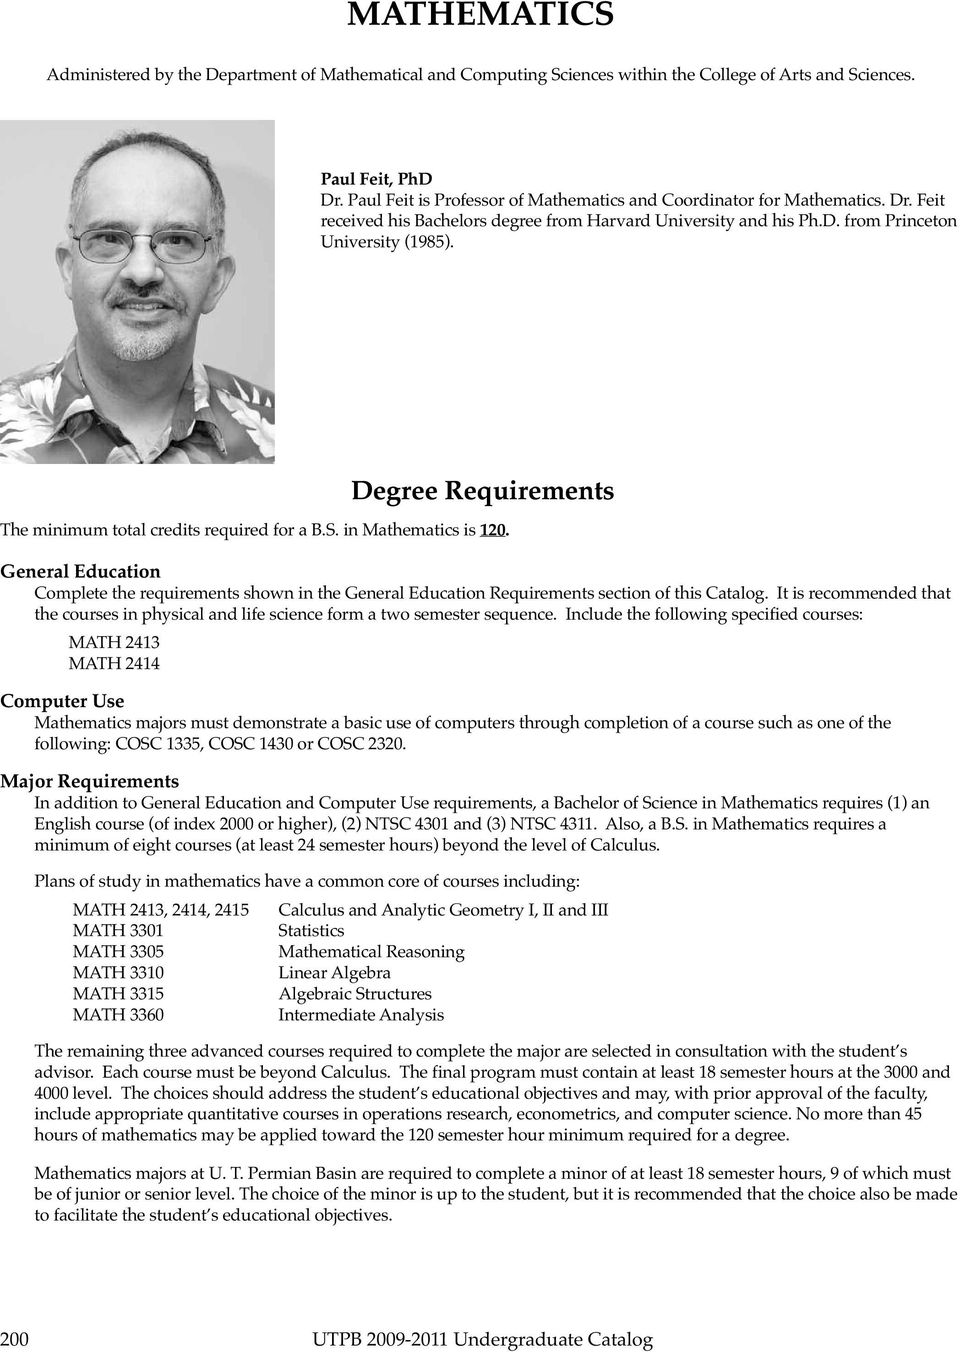 Degree Requirements The minimum total credits required for a B.S. in Mathematics is 120.